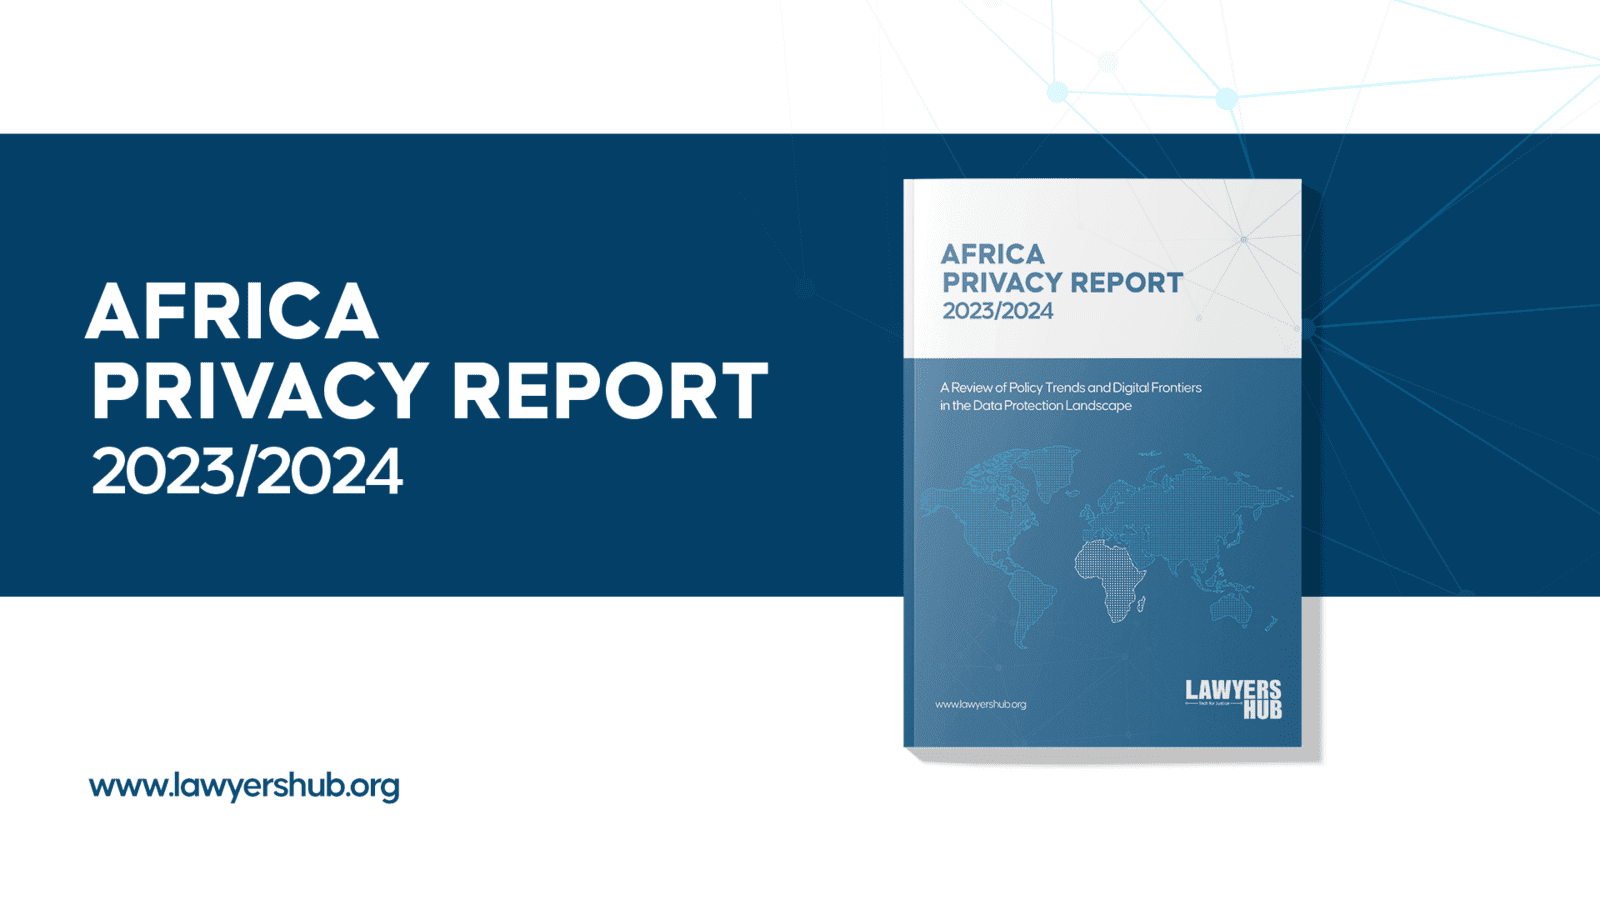 The Lawyers Hub launches the Africa Privacy Report 2023/2024